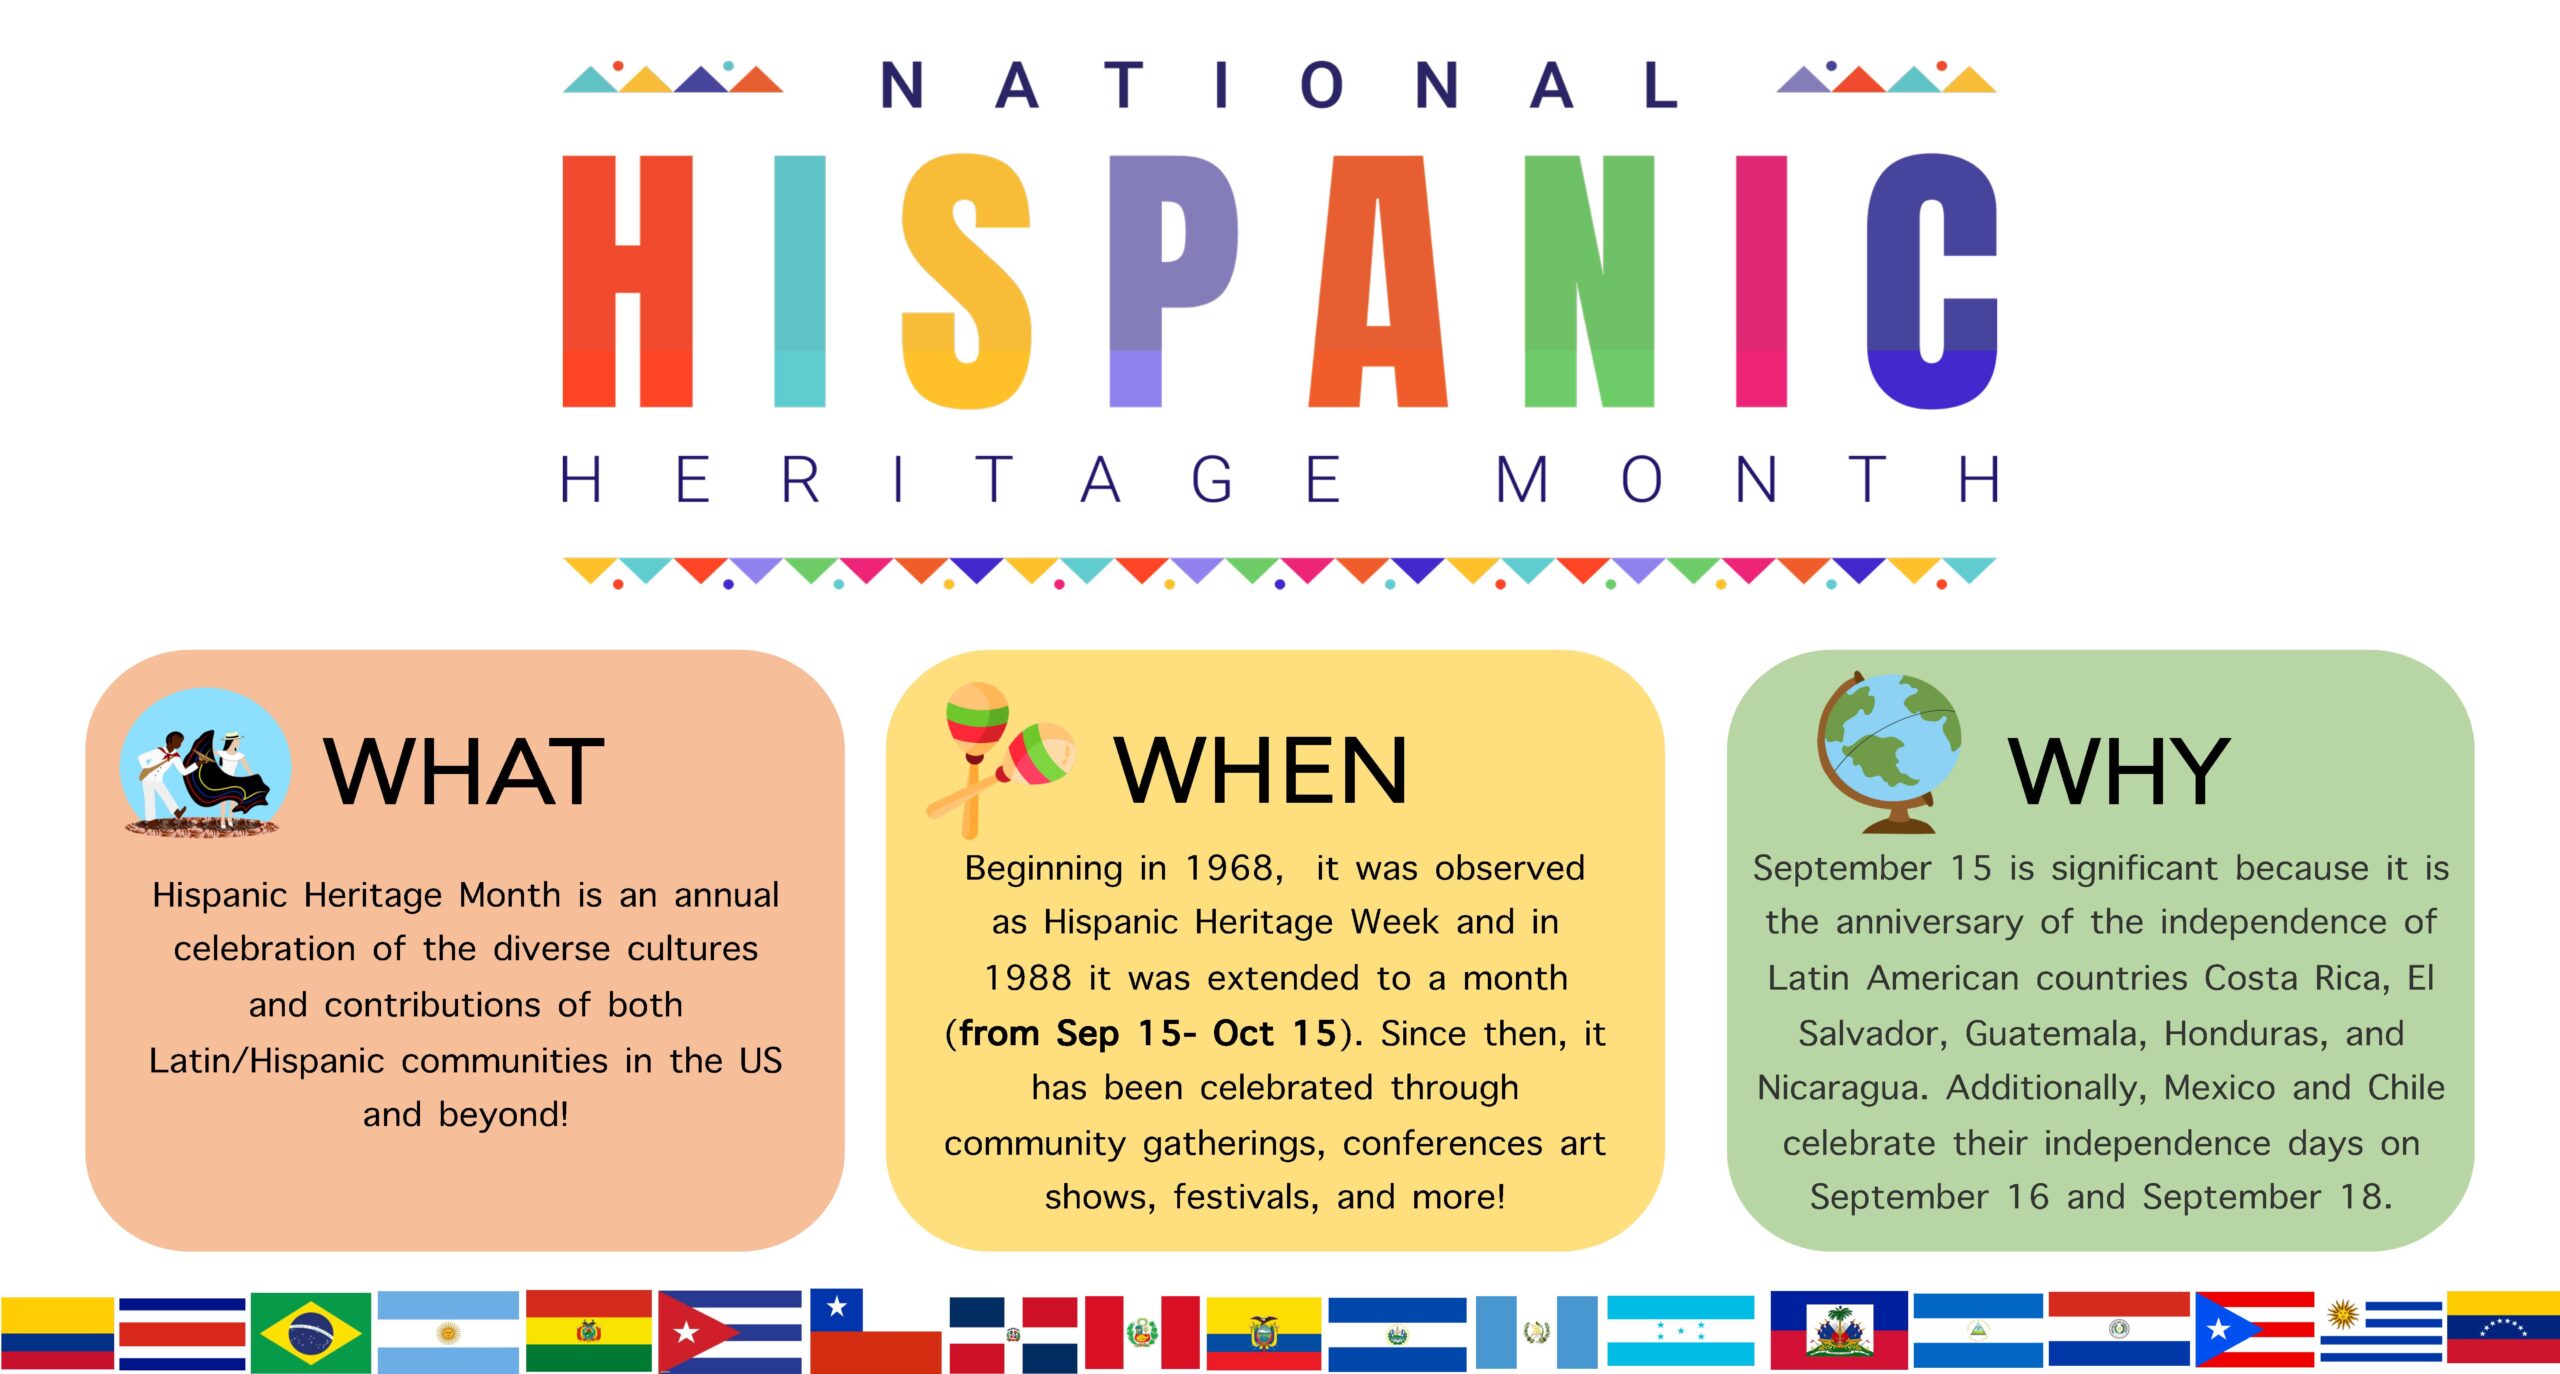 National Hispanic Heritage Month What: Hispanic Heritage Month is an annual celebration of the diverse cultures and contributions of both Latin/Hispanic communities in the US and beyond! When: Beginning in 1968, it was observed as Hispanic Heritage Week and in 1988 it was extended to a month (from Sep 15- Oct 15). Since then, it has been celebrated through community gatherings, conferences art shows, festivals, and more! Why: September 15 is significant because it is the anniversary of the independence of Latin American countries Costa Rica, El Salvador, Guatemala, Honduras, and Nicaragua. Additionally, Mexico and Chile celebrate their independence days on September 16 and September 18.